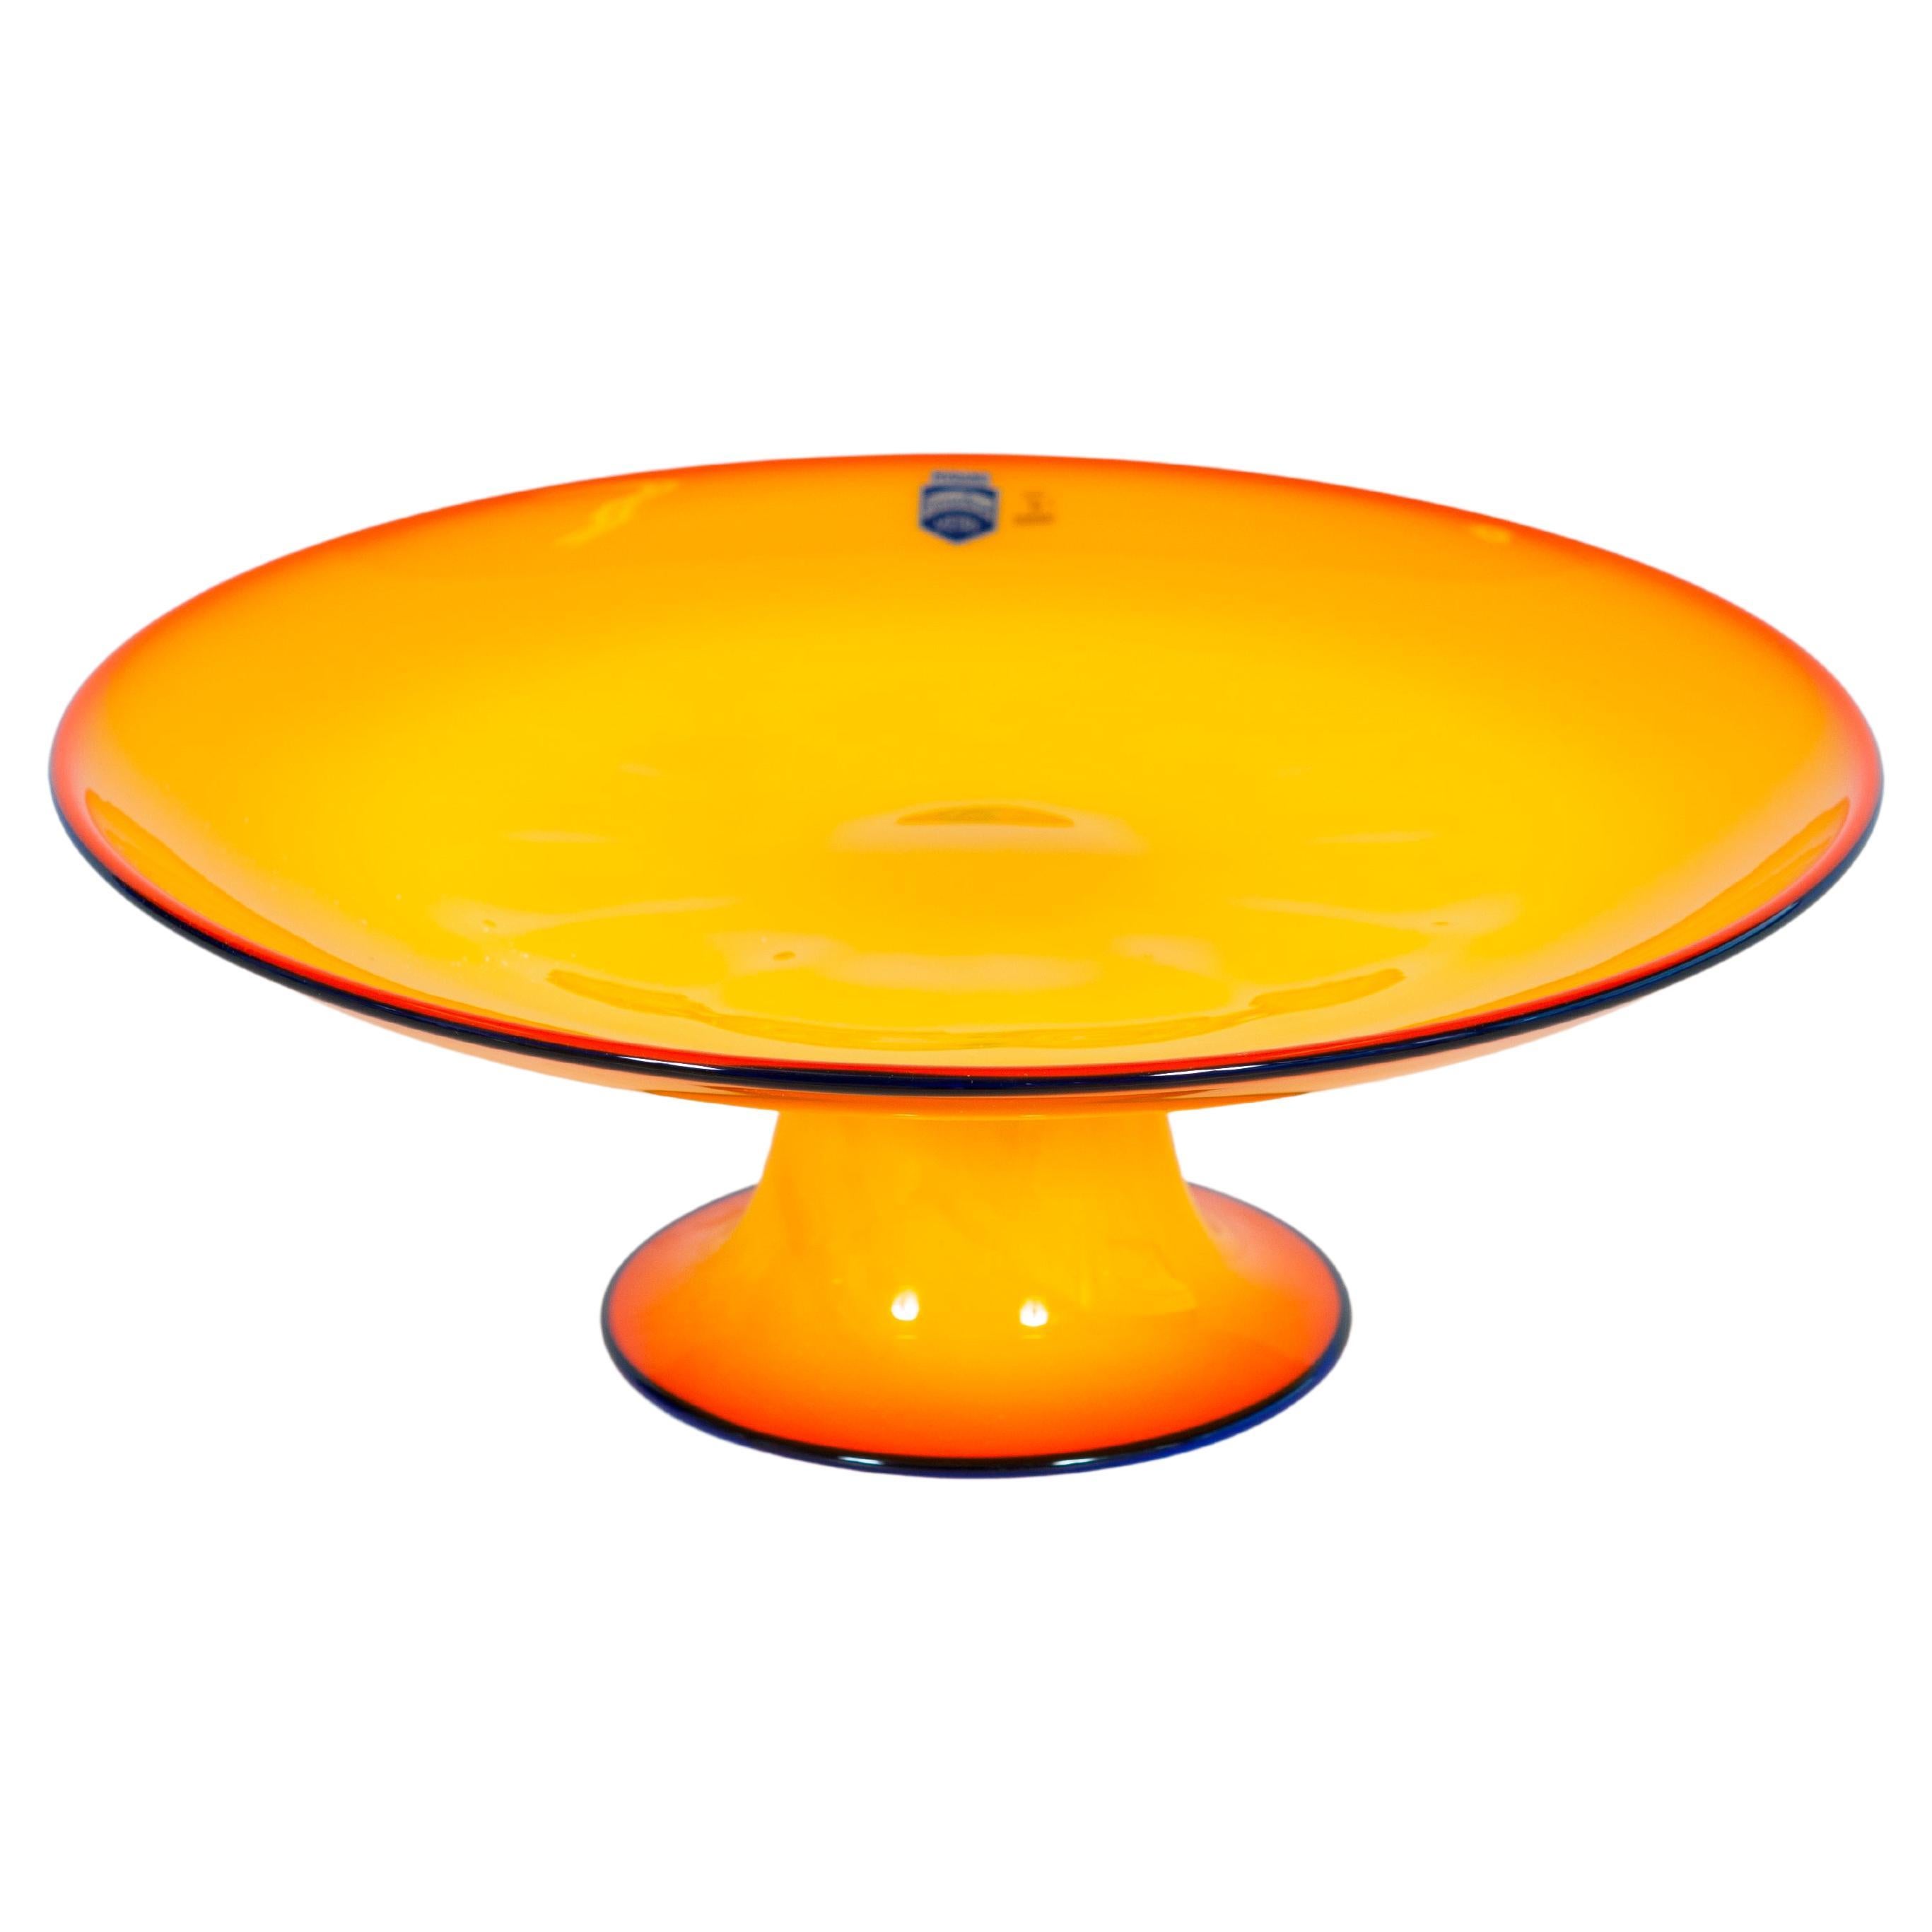 Original Cendese Footed Bowl in Sunny Yellow in blown  Murano Glass 1980s Italy  For Sale